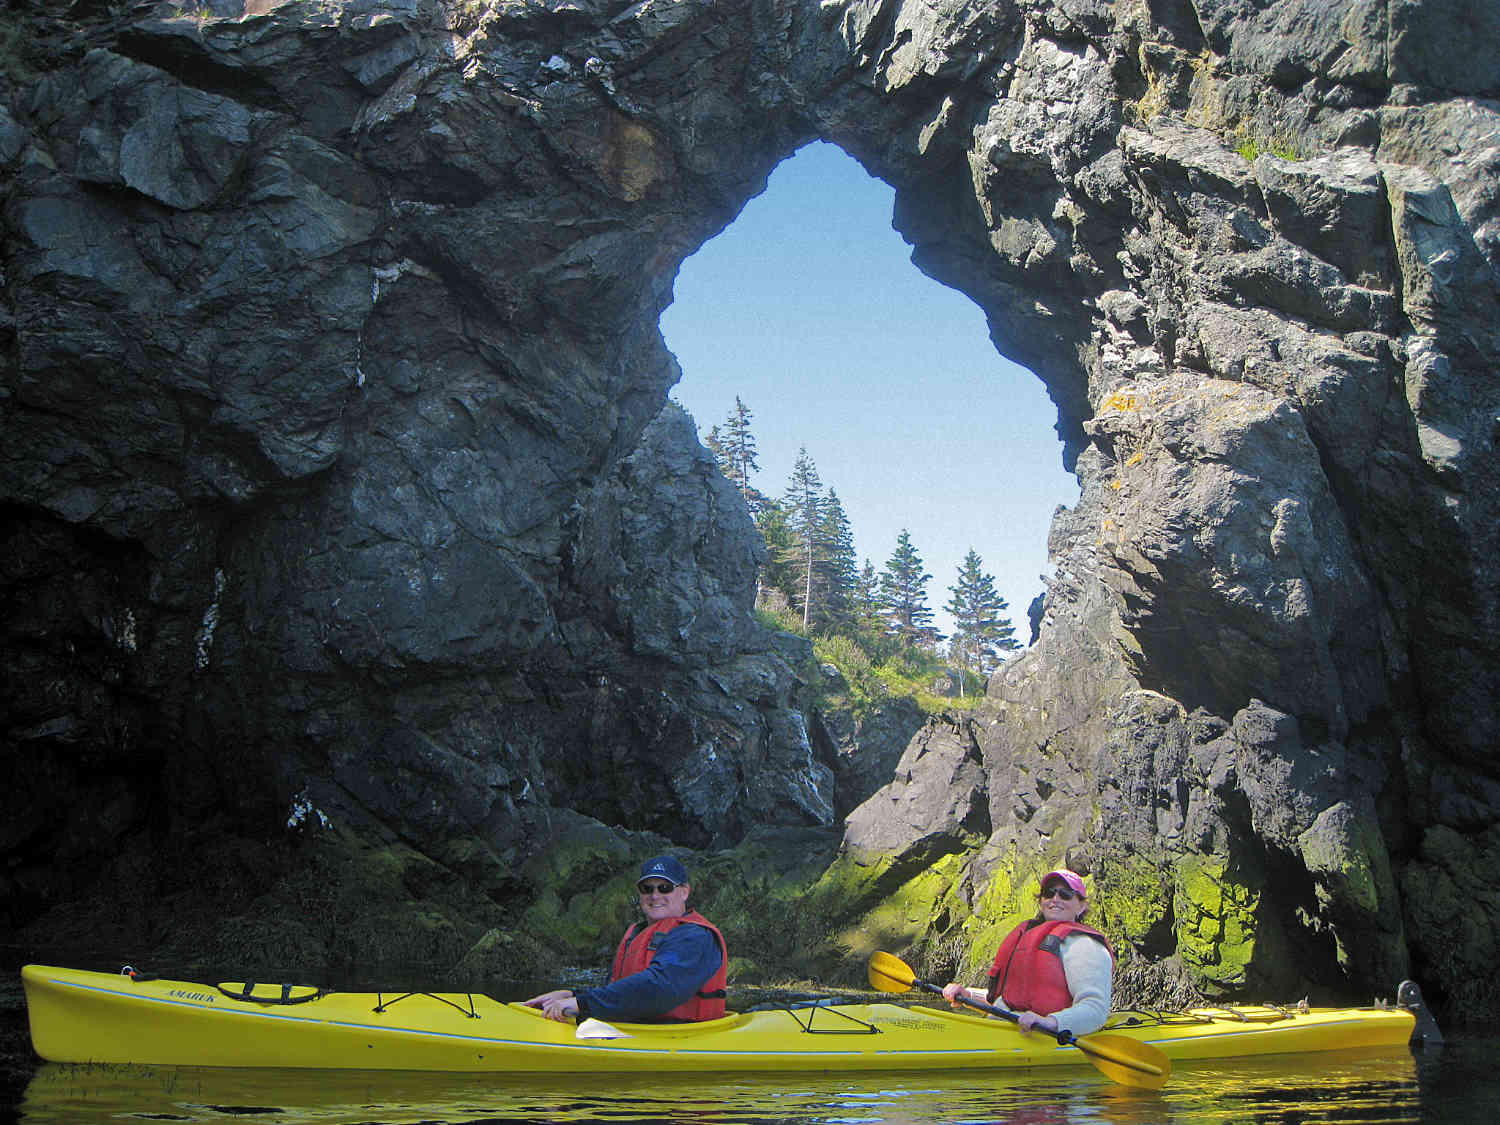 Kayakers at Hole-in-the-Wall, at Grand Manan in the Bay of Fundy, New Brunswick, Canada